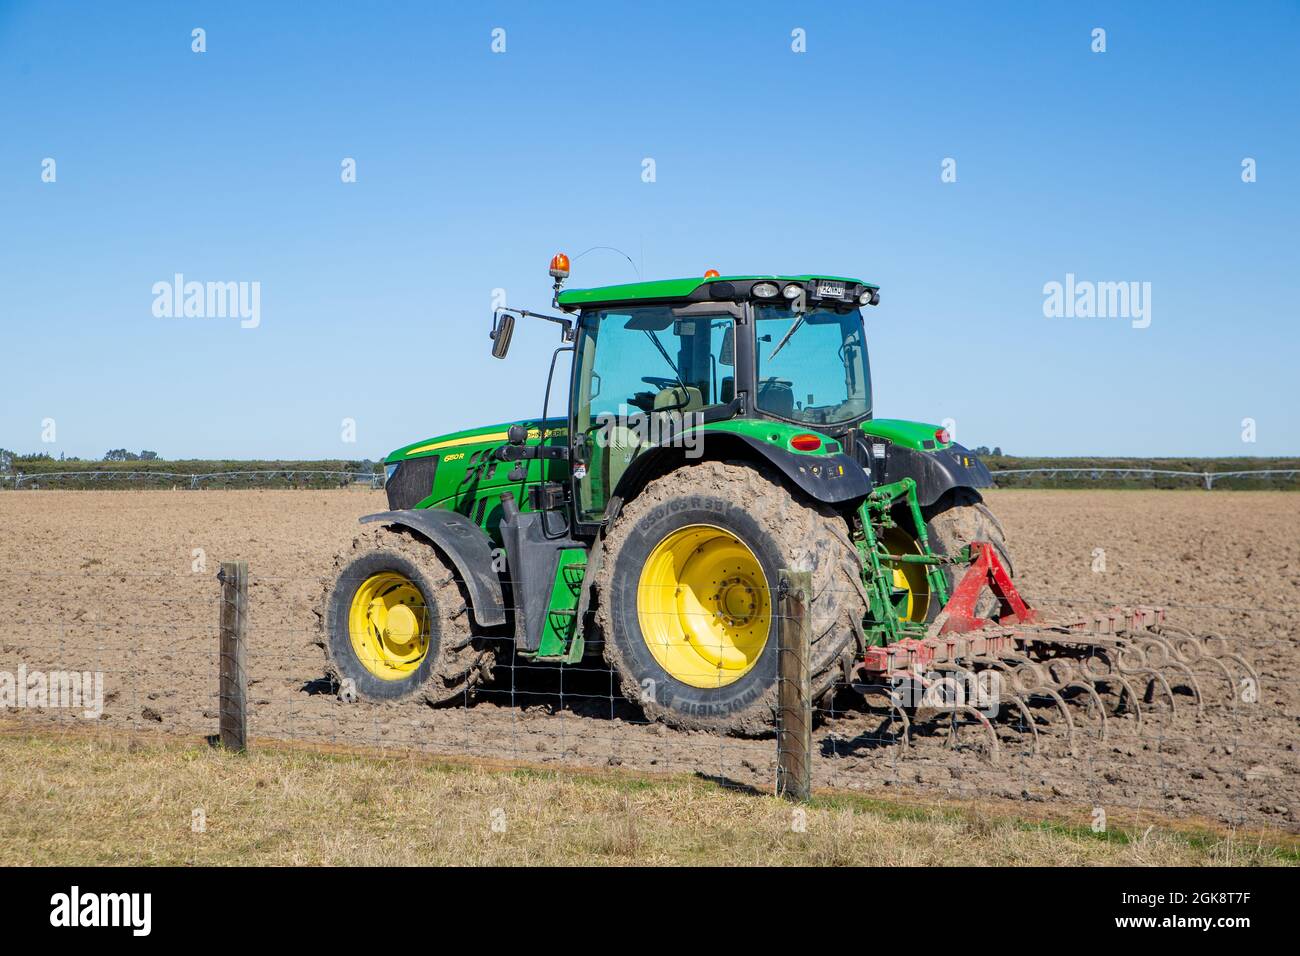 Canterbury, New Zealand, September 3 2021: A John Deere tractor with a plough attached sits in a rural field after preparing a field for sowing Stock Photo